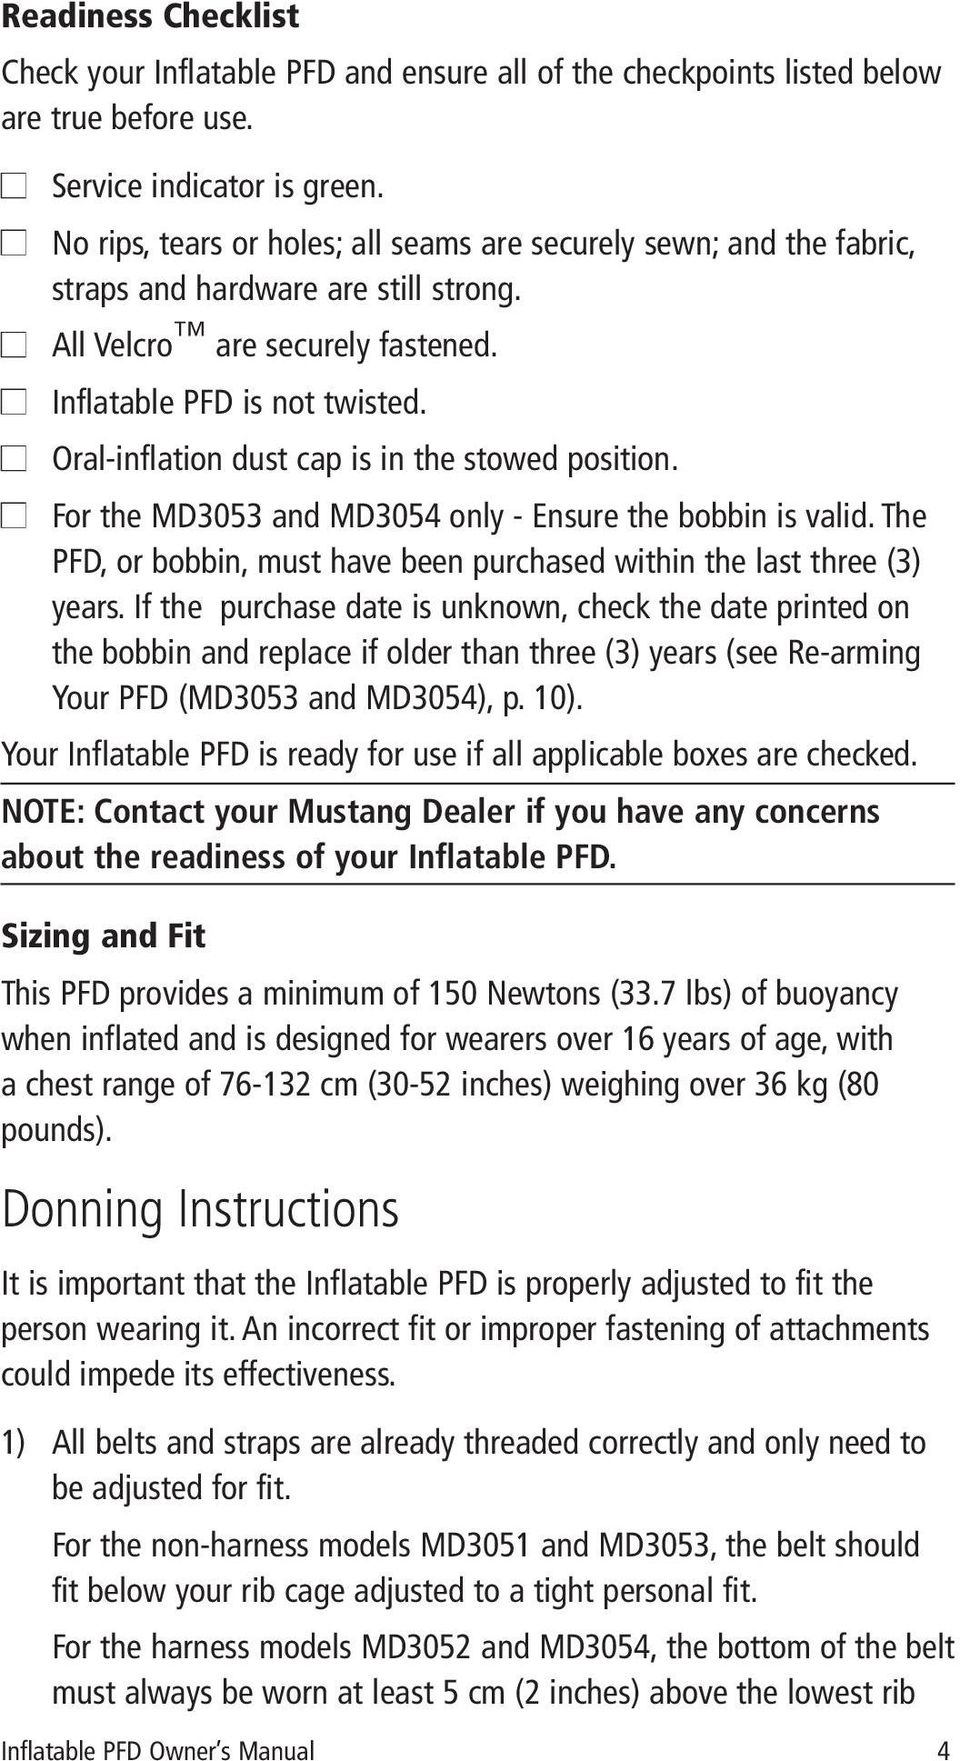 Oral-inflation dust cap is in the stowed position. For the MD3053 and MD3054 only - Ensure the bobbin is valid. The PFD, or bobbin, must have been purchased within the last three (3) years.